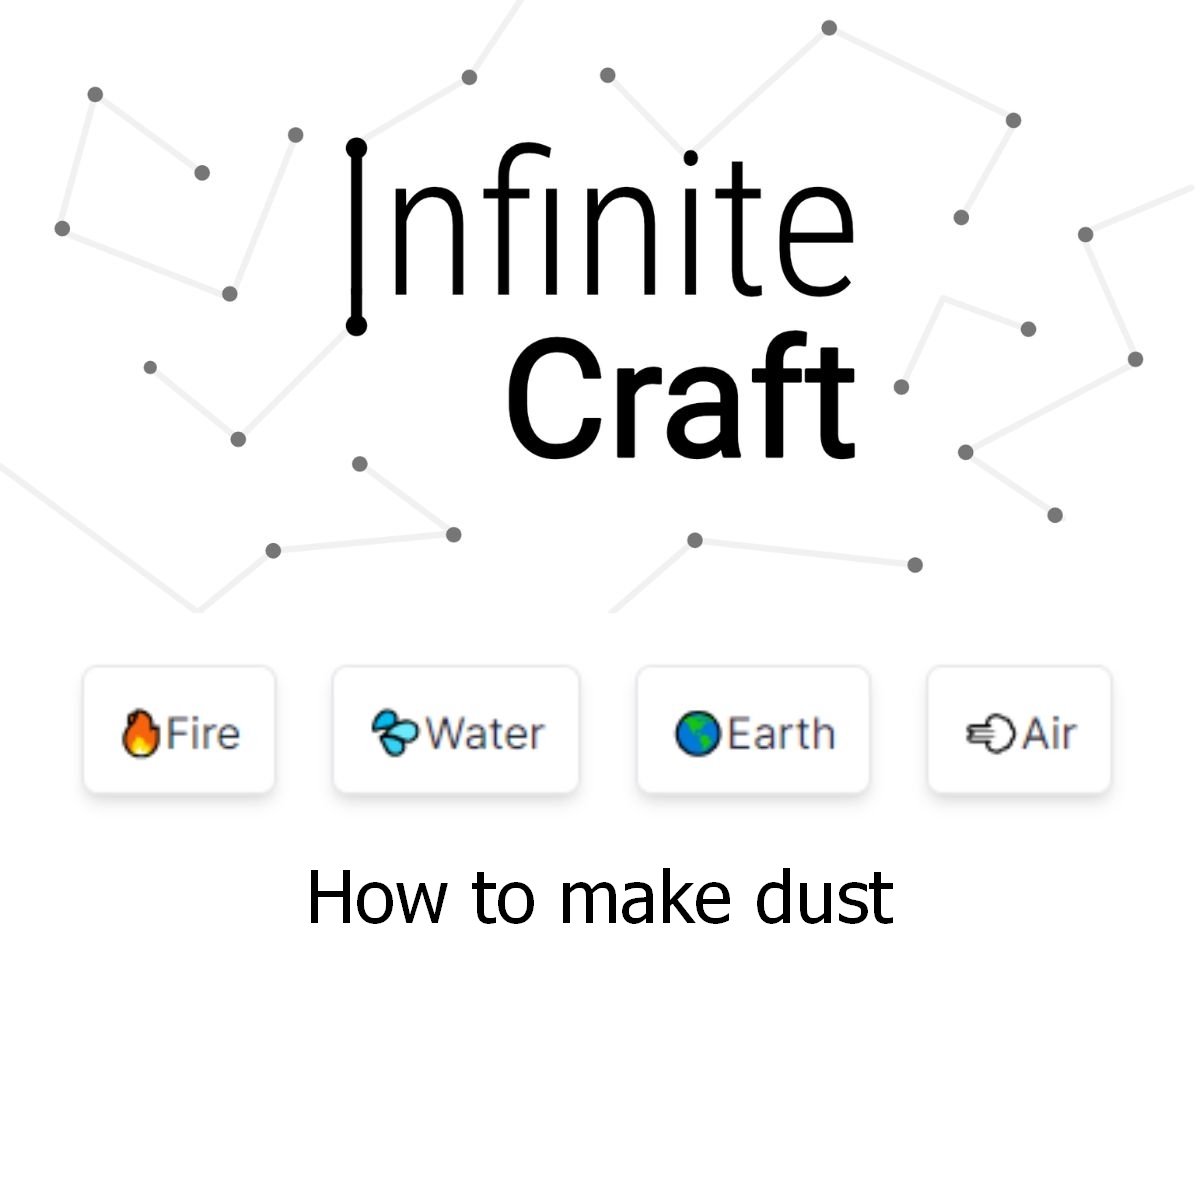 how to make dust in infinite craft